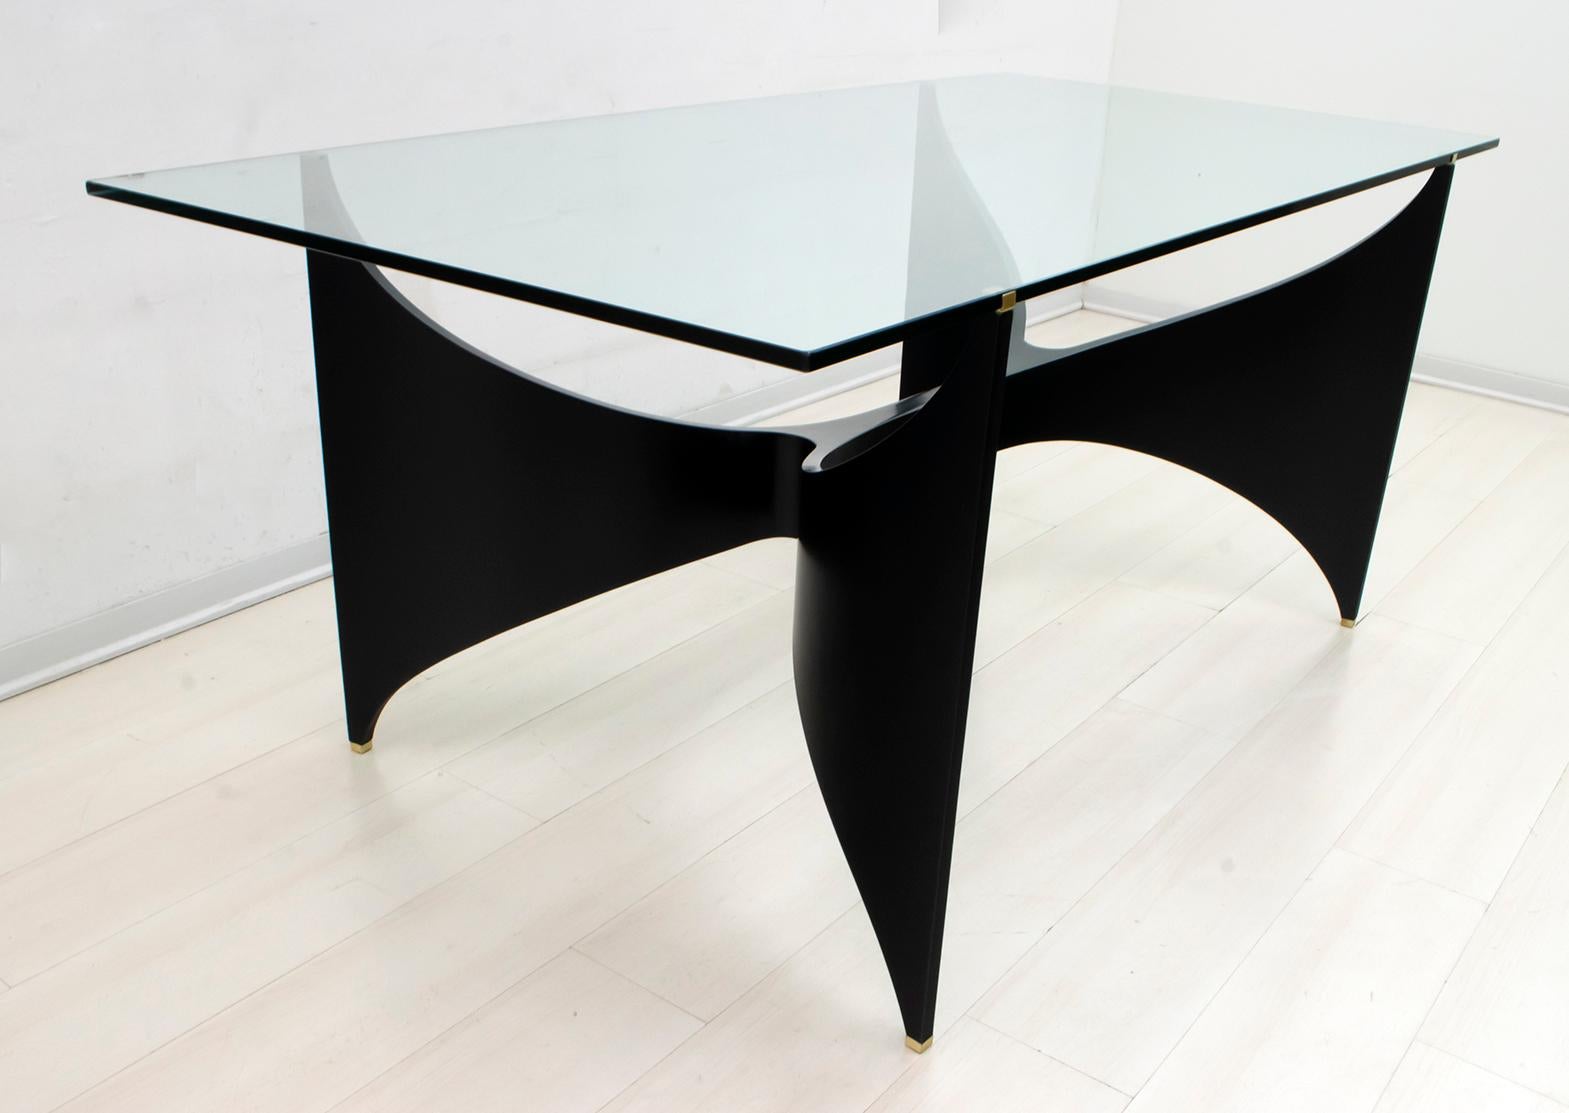 Massironi Manfredo
Rectangular table with lacquered wood structure, brass terminals, glass top.

Manfredo Massironi was an Italian artist and architect. Born in Padua in 1937. After studying architecture in Venice, in 1959 he was one of the